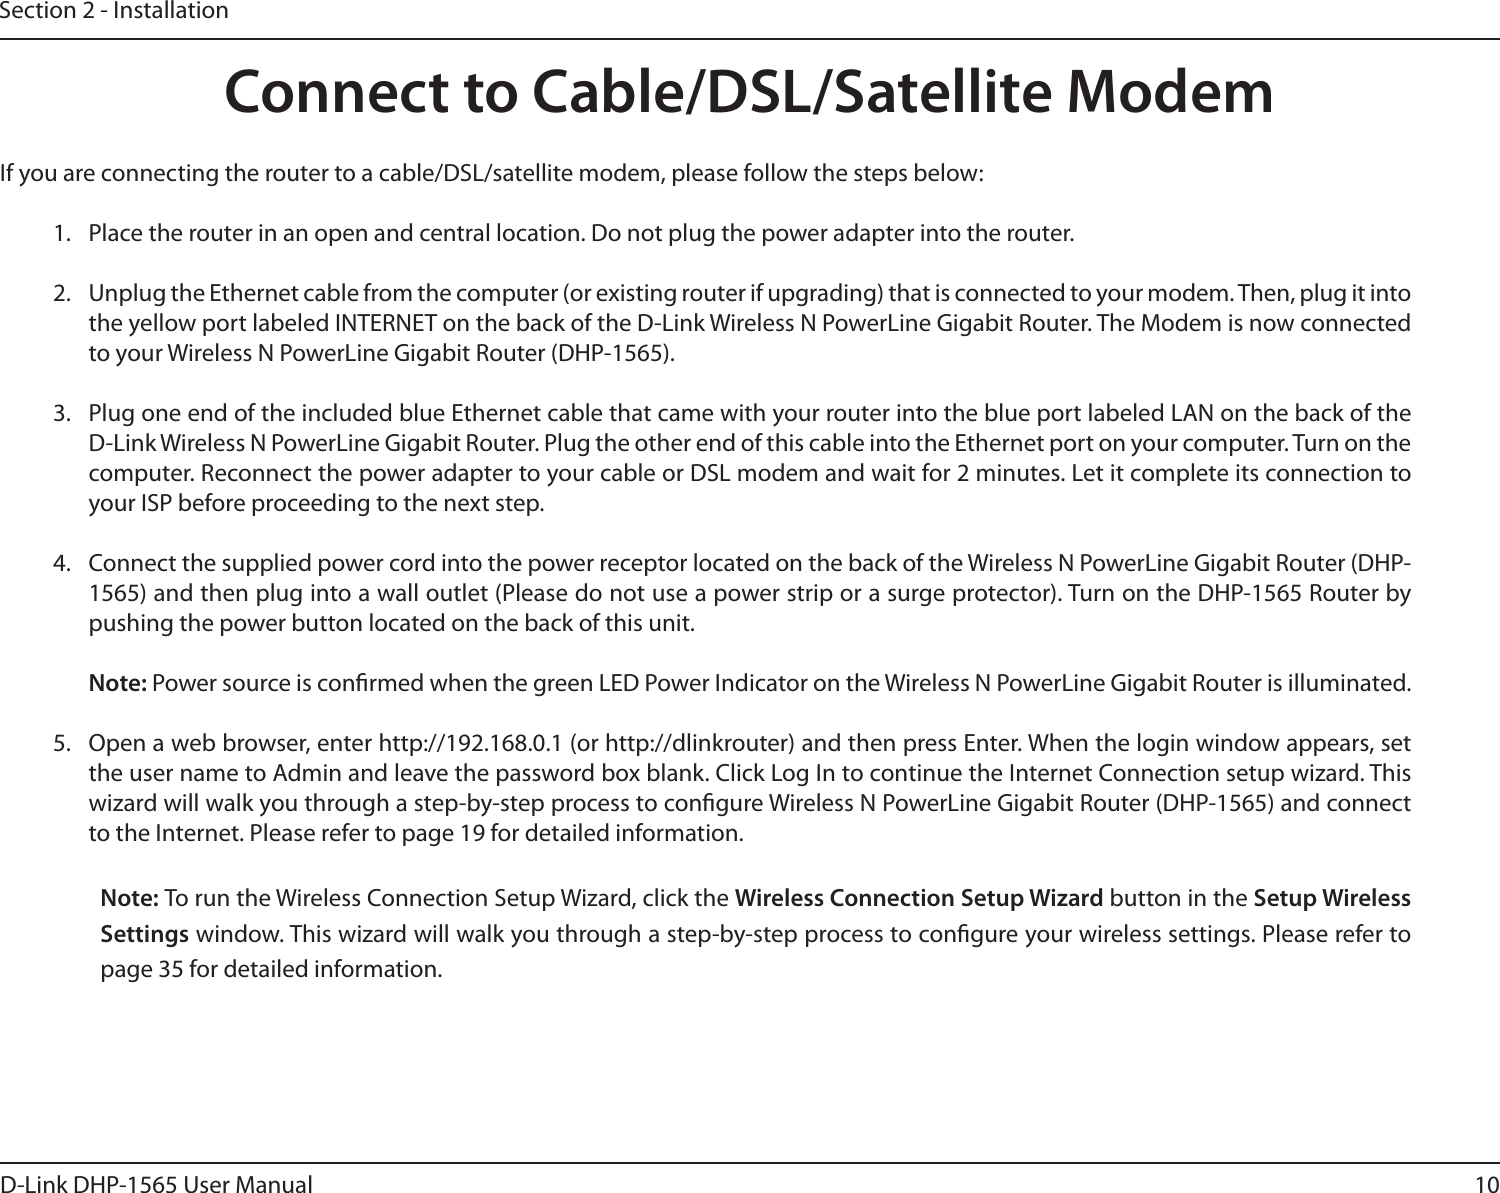 10D-Link DHP-1565 User ManualSection 2 - InstallationIf you are connecting the router to a cable/DSL/satellite modem, please follow the steps below:1.  Place the router in an open and central location. Do not plug the power adapter into the router.2.  Unplug the Ethernet cable from the computer (or existing router if upgrading) that is connected to your modem. Then, plug it into the yellow port labeled INTERNET on the back of the D-Link Wireless N PowerLine Gigabit Router. The Modem is now connected to your Wireless N PowerLine Gigabit Router (DHP-1565).3.  Plug one end of the included blue Ethernet cable that came with your router into the blue port labeled LAN on the back of the D-Link Wireless N PowerLine Gigabit Router. Plug the other end of this cable into the Ethernet port on your computer. Turn on the computer. Reconnect the power adapter to your cable or DSL modem and wait for 2 minutes. Let it complete its connection to your ISP before proceeding to the next step.4.  Connect the supplied power cord into the power receptor located on the back of the Wireless N PowerLine Gigabit Router (DHP-1565) and then plug into a wall outlet (Please do not use a power strip or a surge protector). Turn on the DHP-1565 Router by pushing the power button located on the back of this unit.Note: Power source is conrmed when the green LED Power Indicator on the Wireless N PowerLine Gigabit Router is illuminated.5.  Open a web browser, enter http://192.168.0.1 (or http://dlinkrouter) and then press Enter. When the login window appears, set the user name to Admin and leave the password box blank. Click Log In to continue the Internet Connection setup wizard. This wizard will walk you through a step-by-step process to congure Wireless N PowerLine Gigabit Router (DHP-1565) and connect to the Internet. Please refer to page 19 for detailed information.Note: To run the Wireless Connection Setup Wizard, click the Wireless Connection Setup Wizard button in the Setup Wireless Settings window. This wizard will walk you through a step-by-step process to congure your wireless settings. Please refer to page 35 for detailed information.Connect to Cable/DSL/Satellite Modem